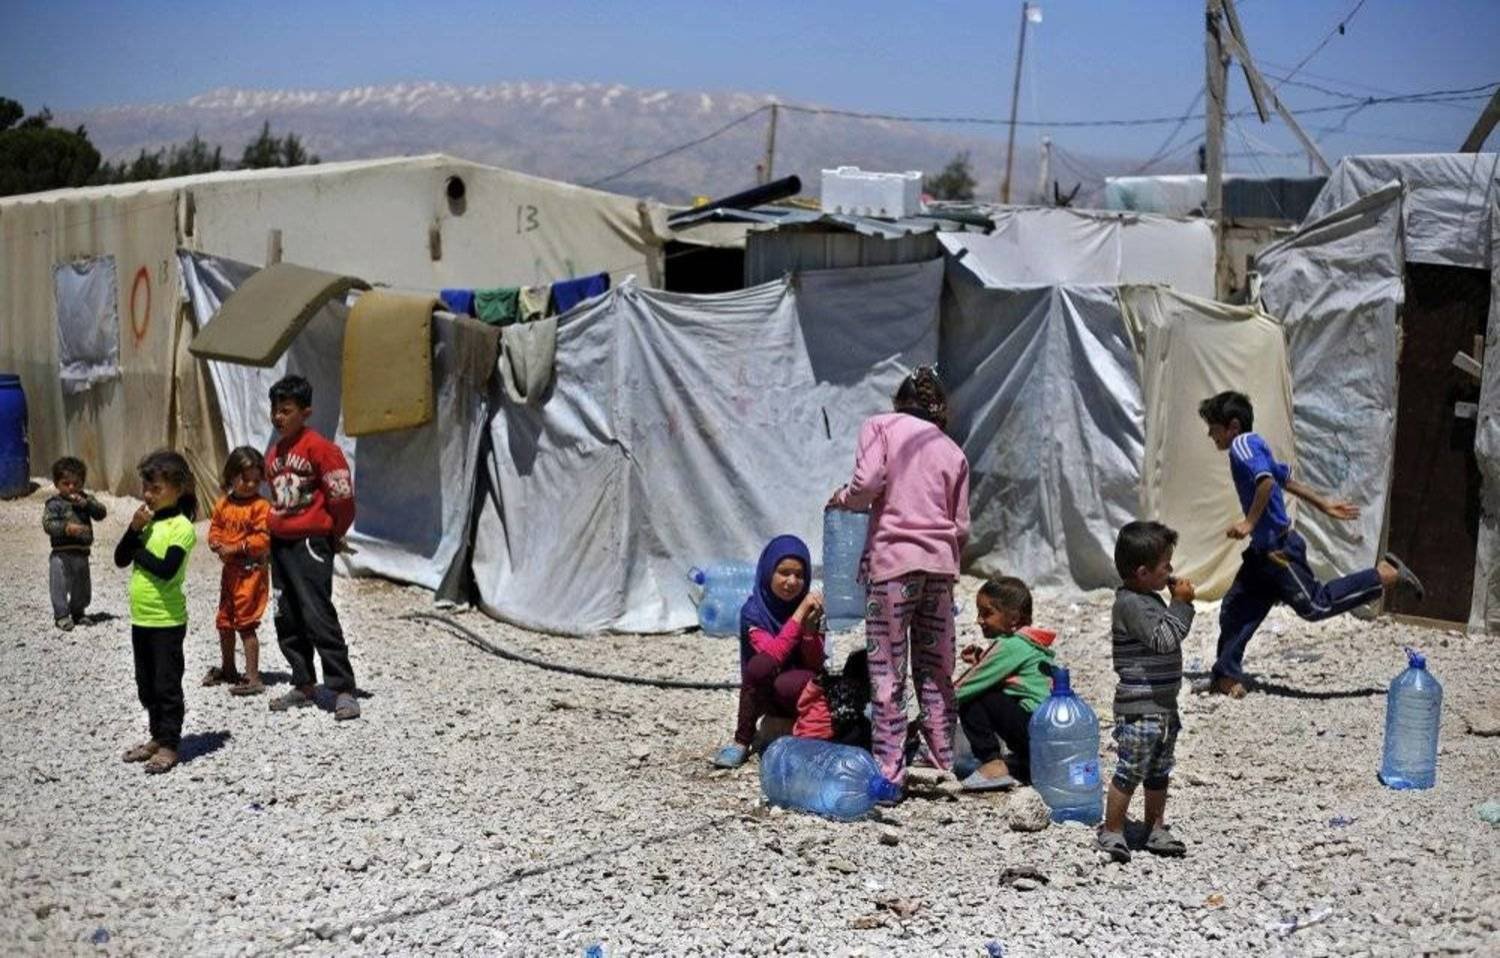 In this Monday, April 23, 2018 photo, Syrian refugee children play outside their family tents at a Syrian refugee camp in the town of Bar Elias, in Lebanon's Bekaa Valley. (AP Photo/Bilal Hussein)
